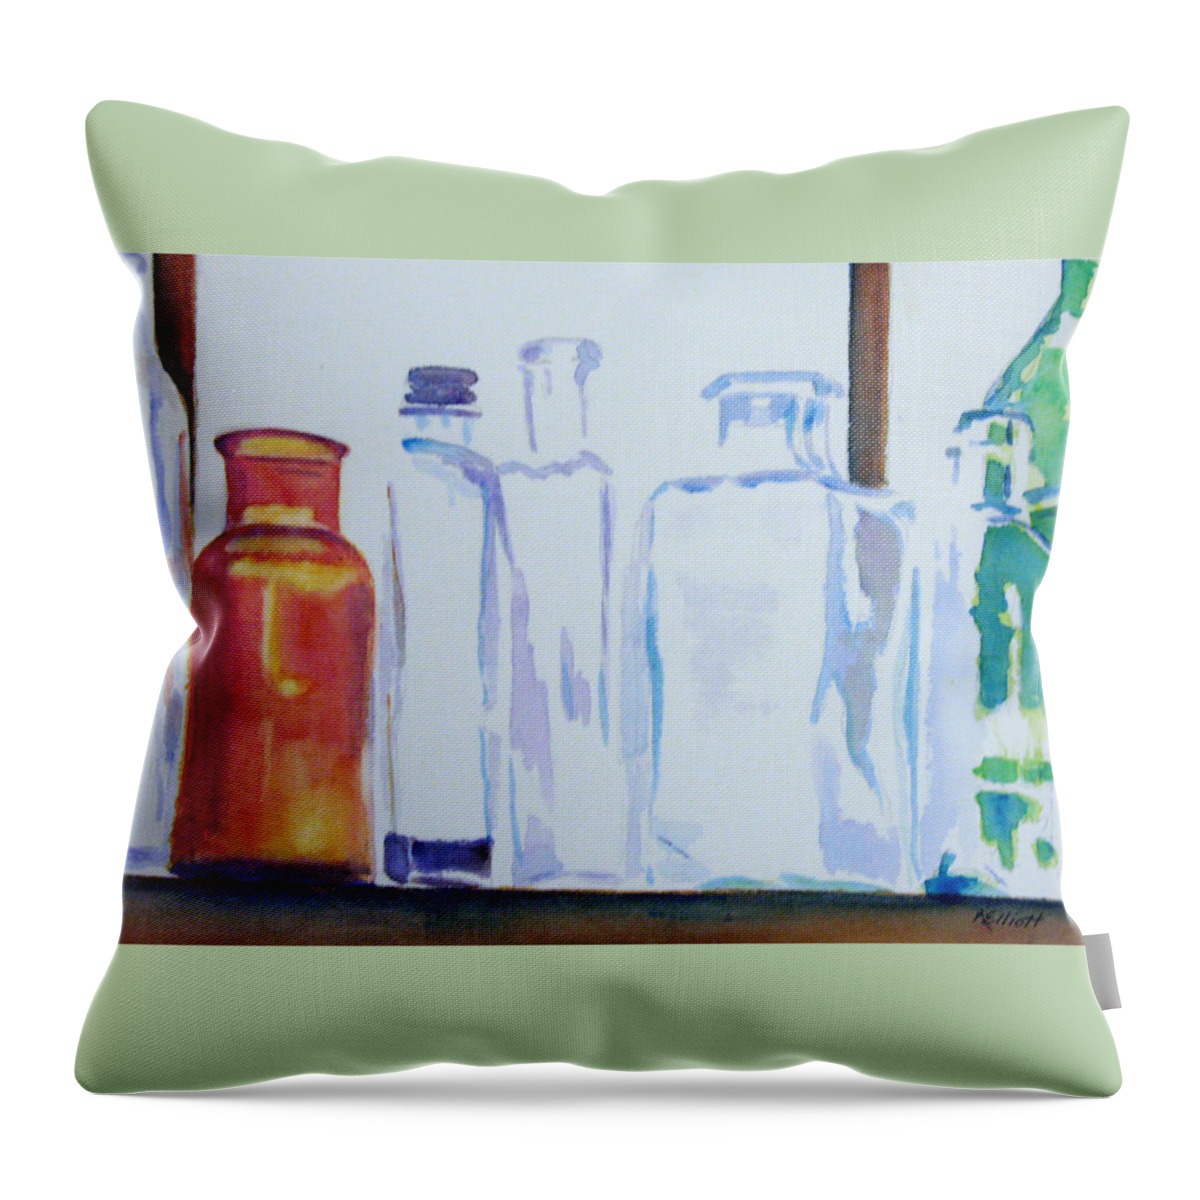 Glass Throw Pillow featuring the painting Transparencies by Marsha Elliott